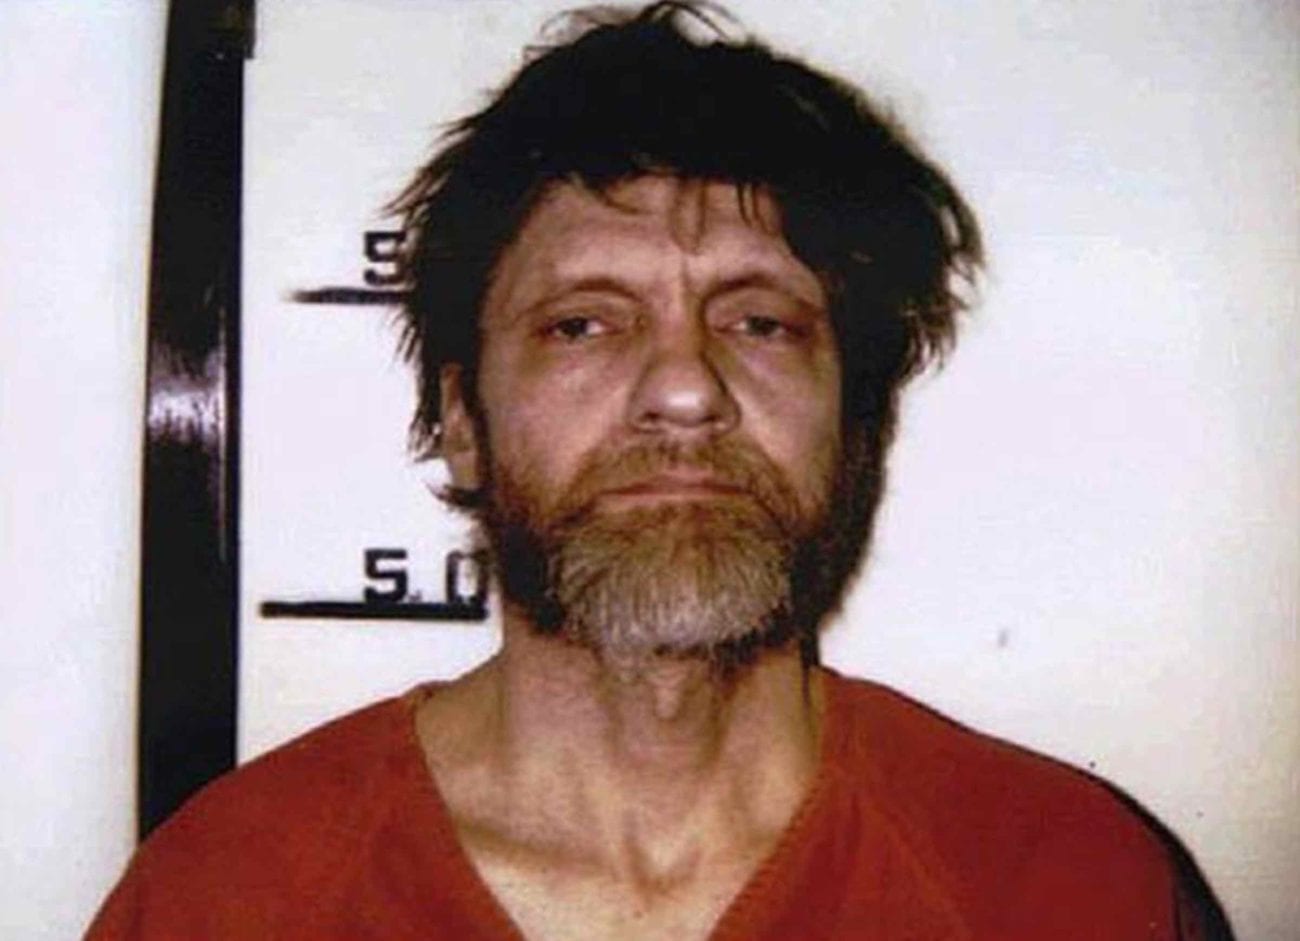 Here’s the true story of Ted Kaczynski and his near two decade long reign as one of America’s most infamous bombers. Here's what we know.